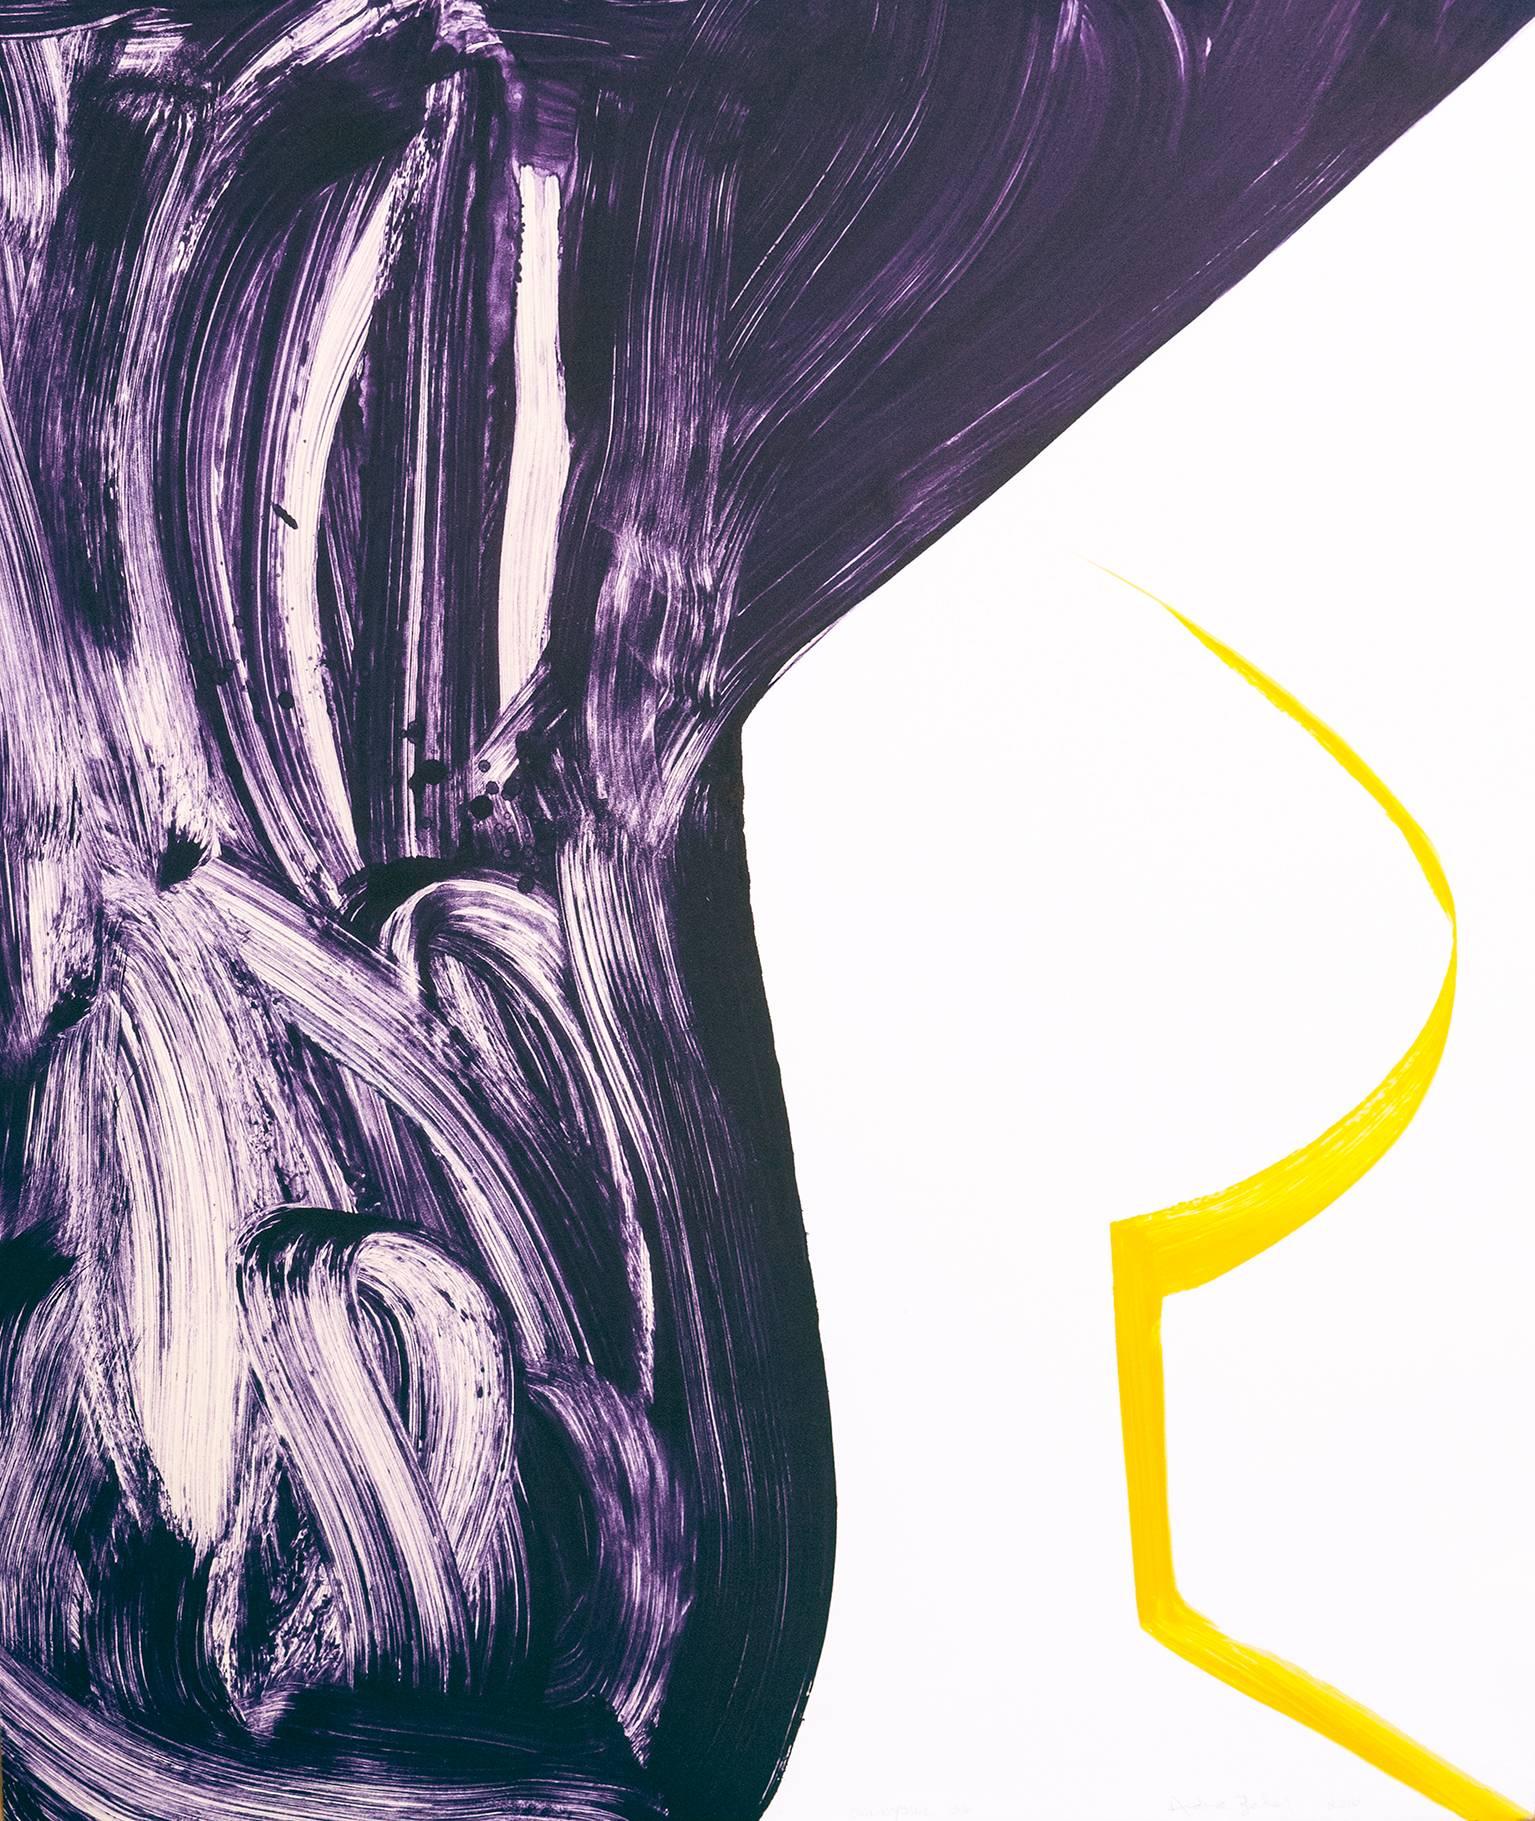 Andrea Belag Abstract Print - "Sunnyside Yards 26",  large abstract gestural monoprint, deep violet, yellow.